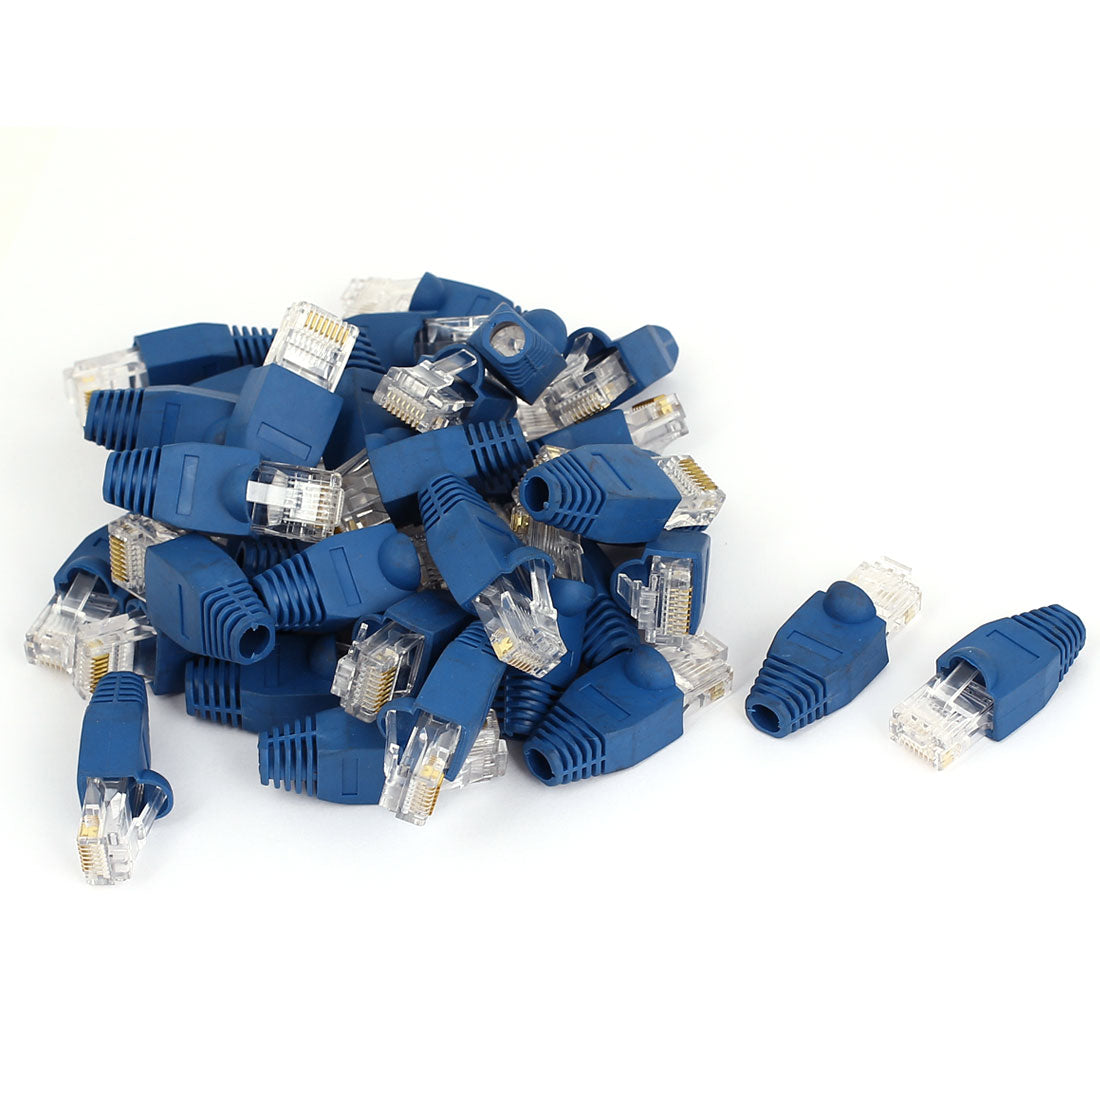 uxcell Uxcell 40 Pcs 8P8C RJ45 Contacts Head Shielded Network End Wire Adapter Connectors w Boots Cover Blue